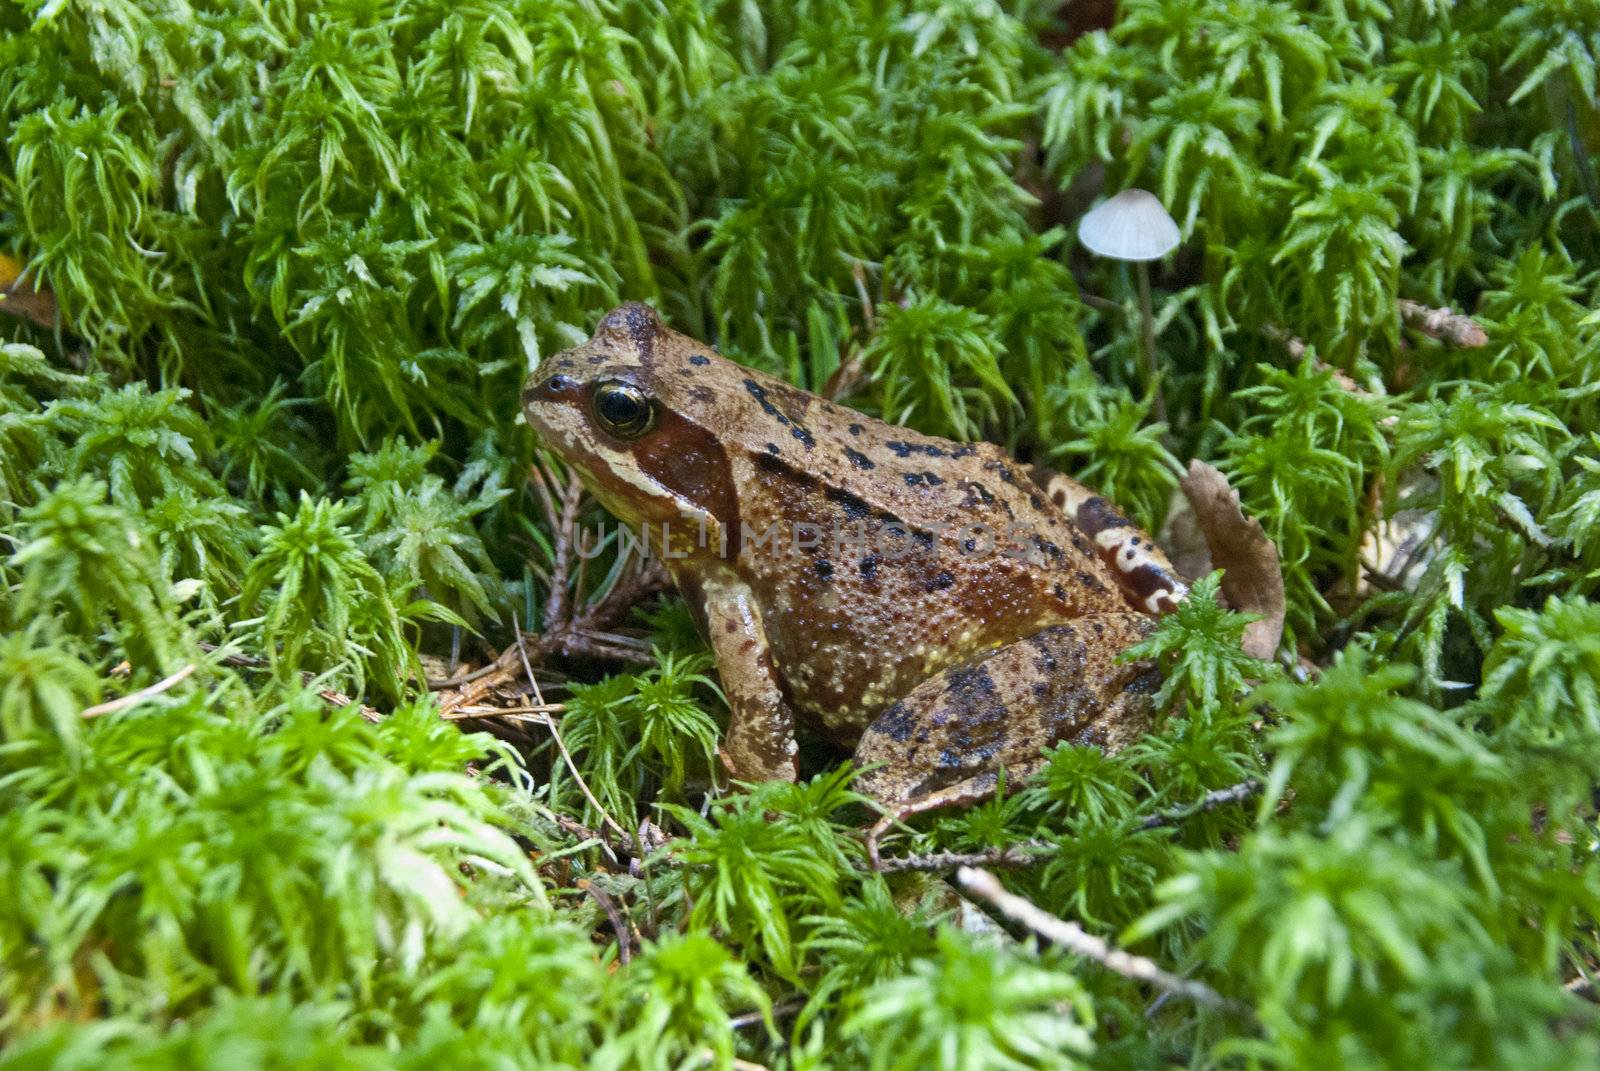 met this frog when we were out in the woods to pick mushrooms